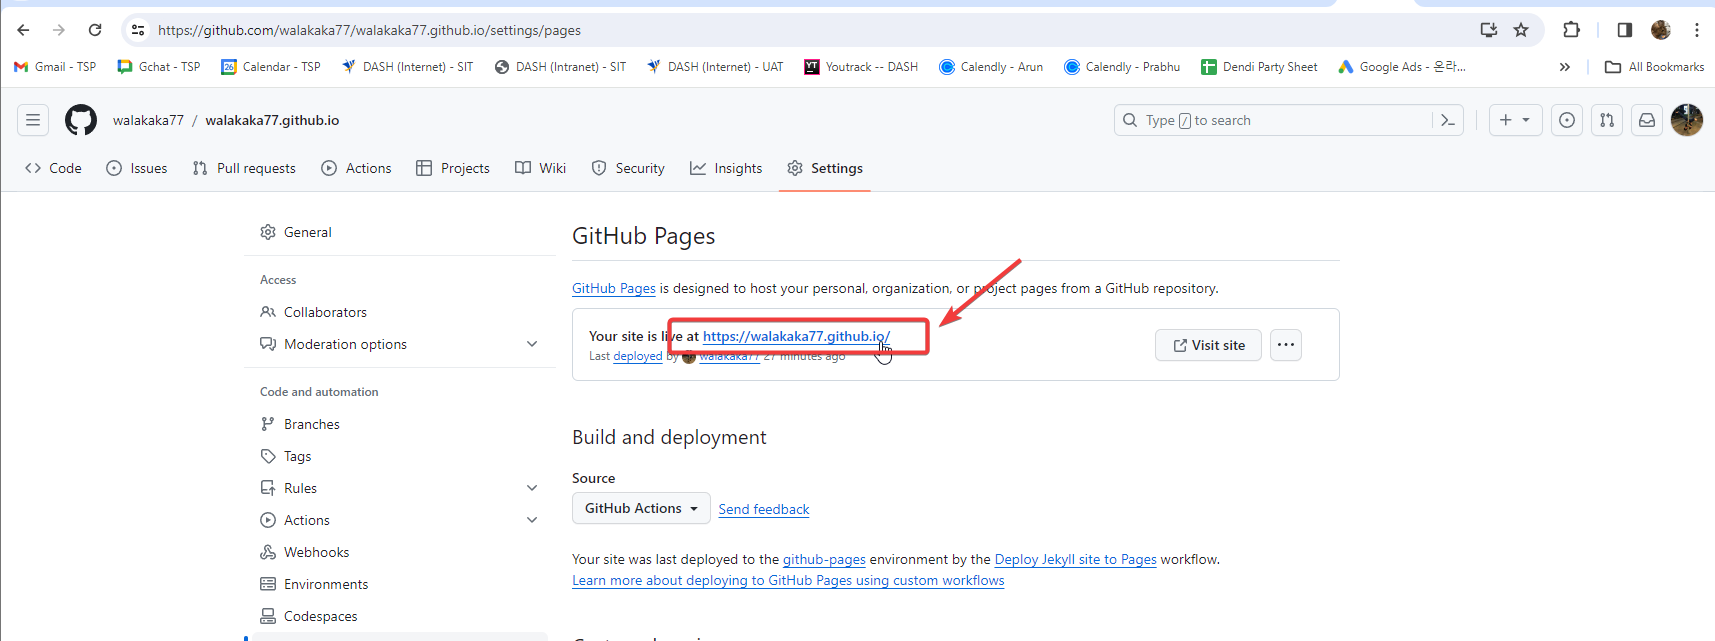 Image showing completed GitHub pages deployment and link to live site